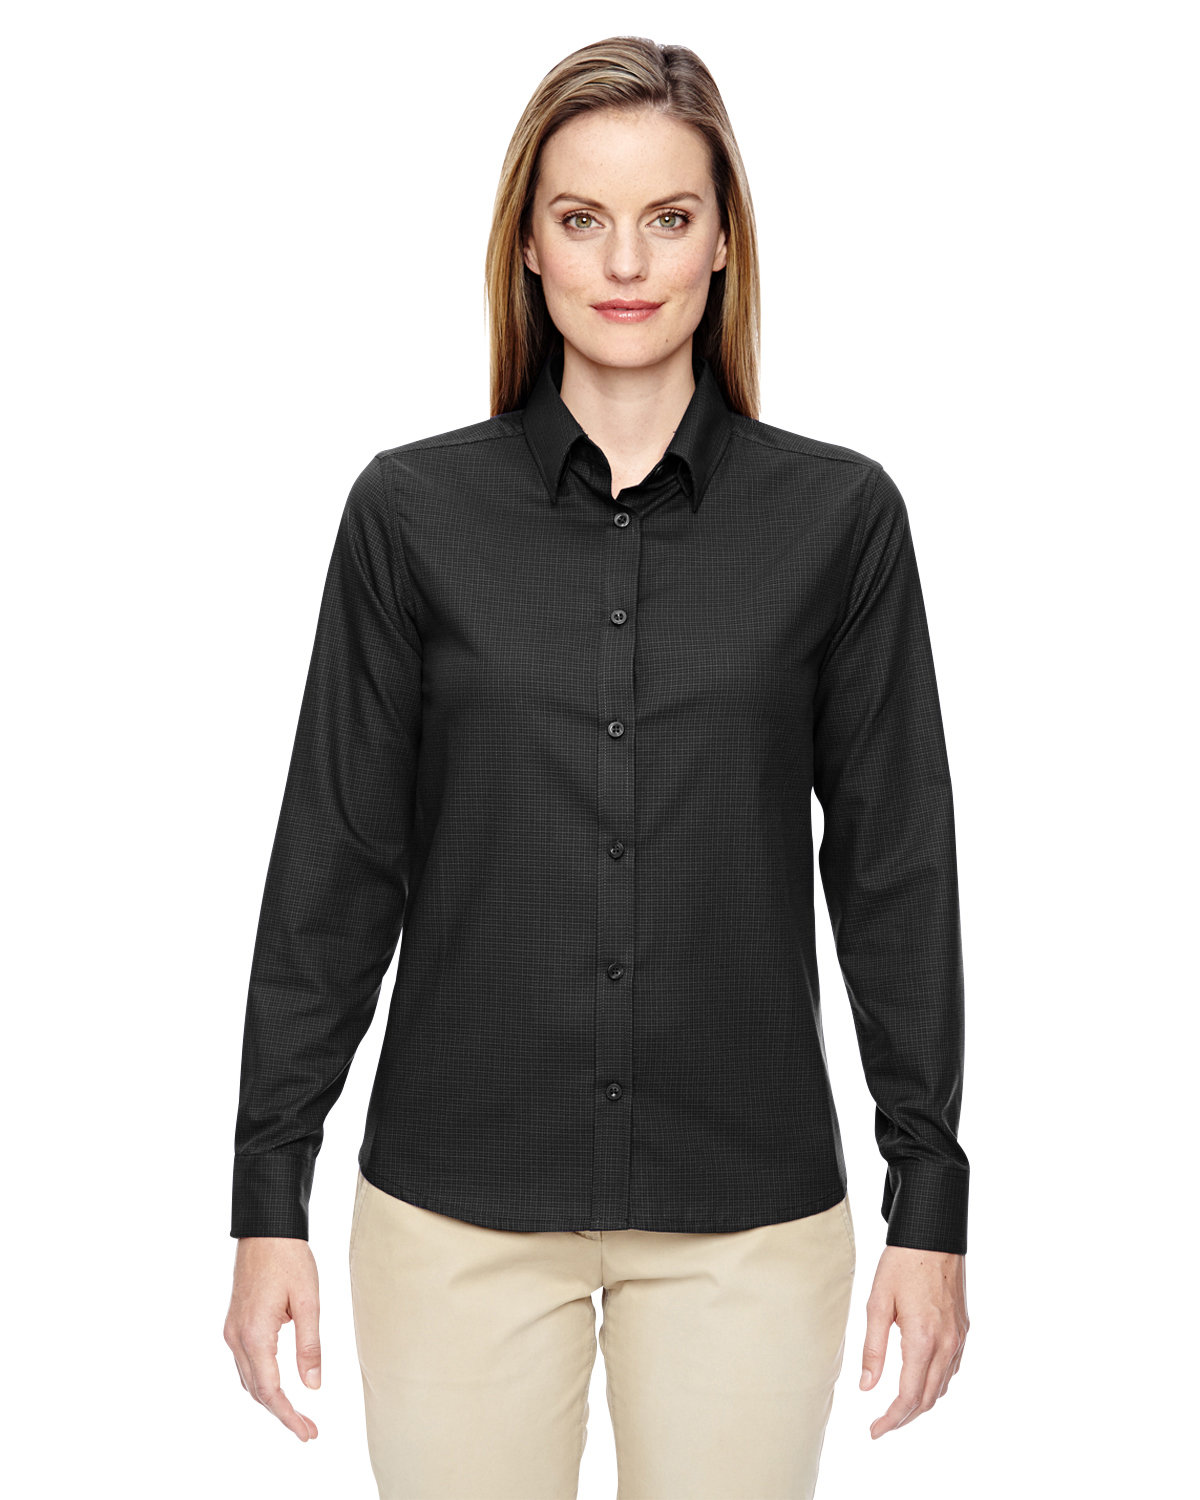 Ladies Paramount Wrinkle-Resistant Cotton Blend Twill Checkered Shirt-North End